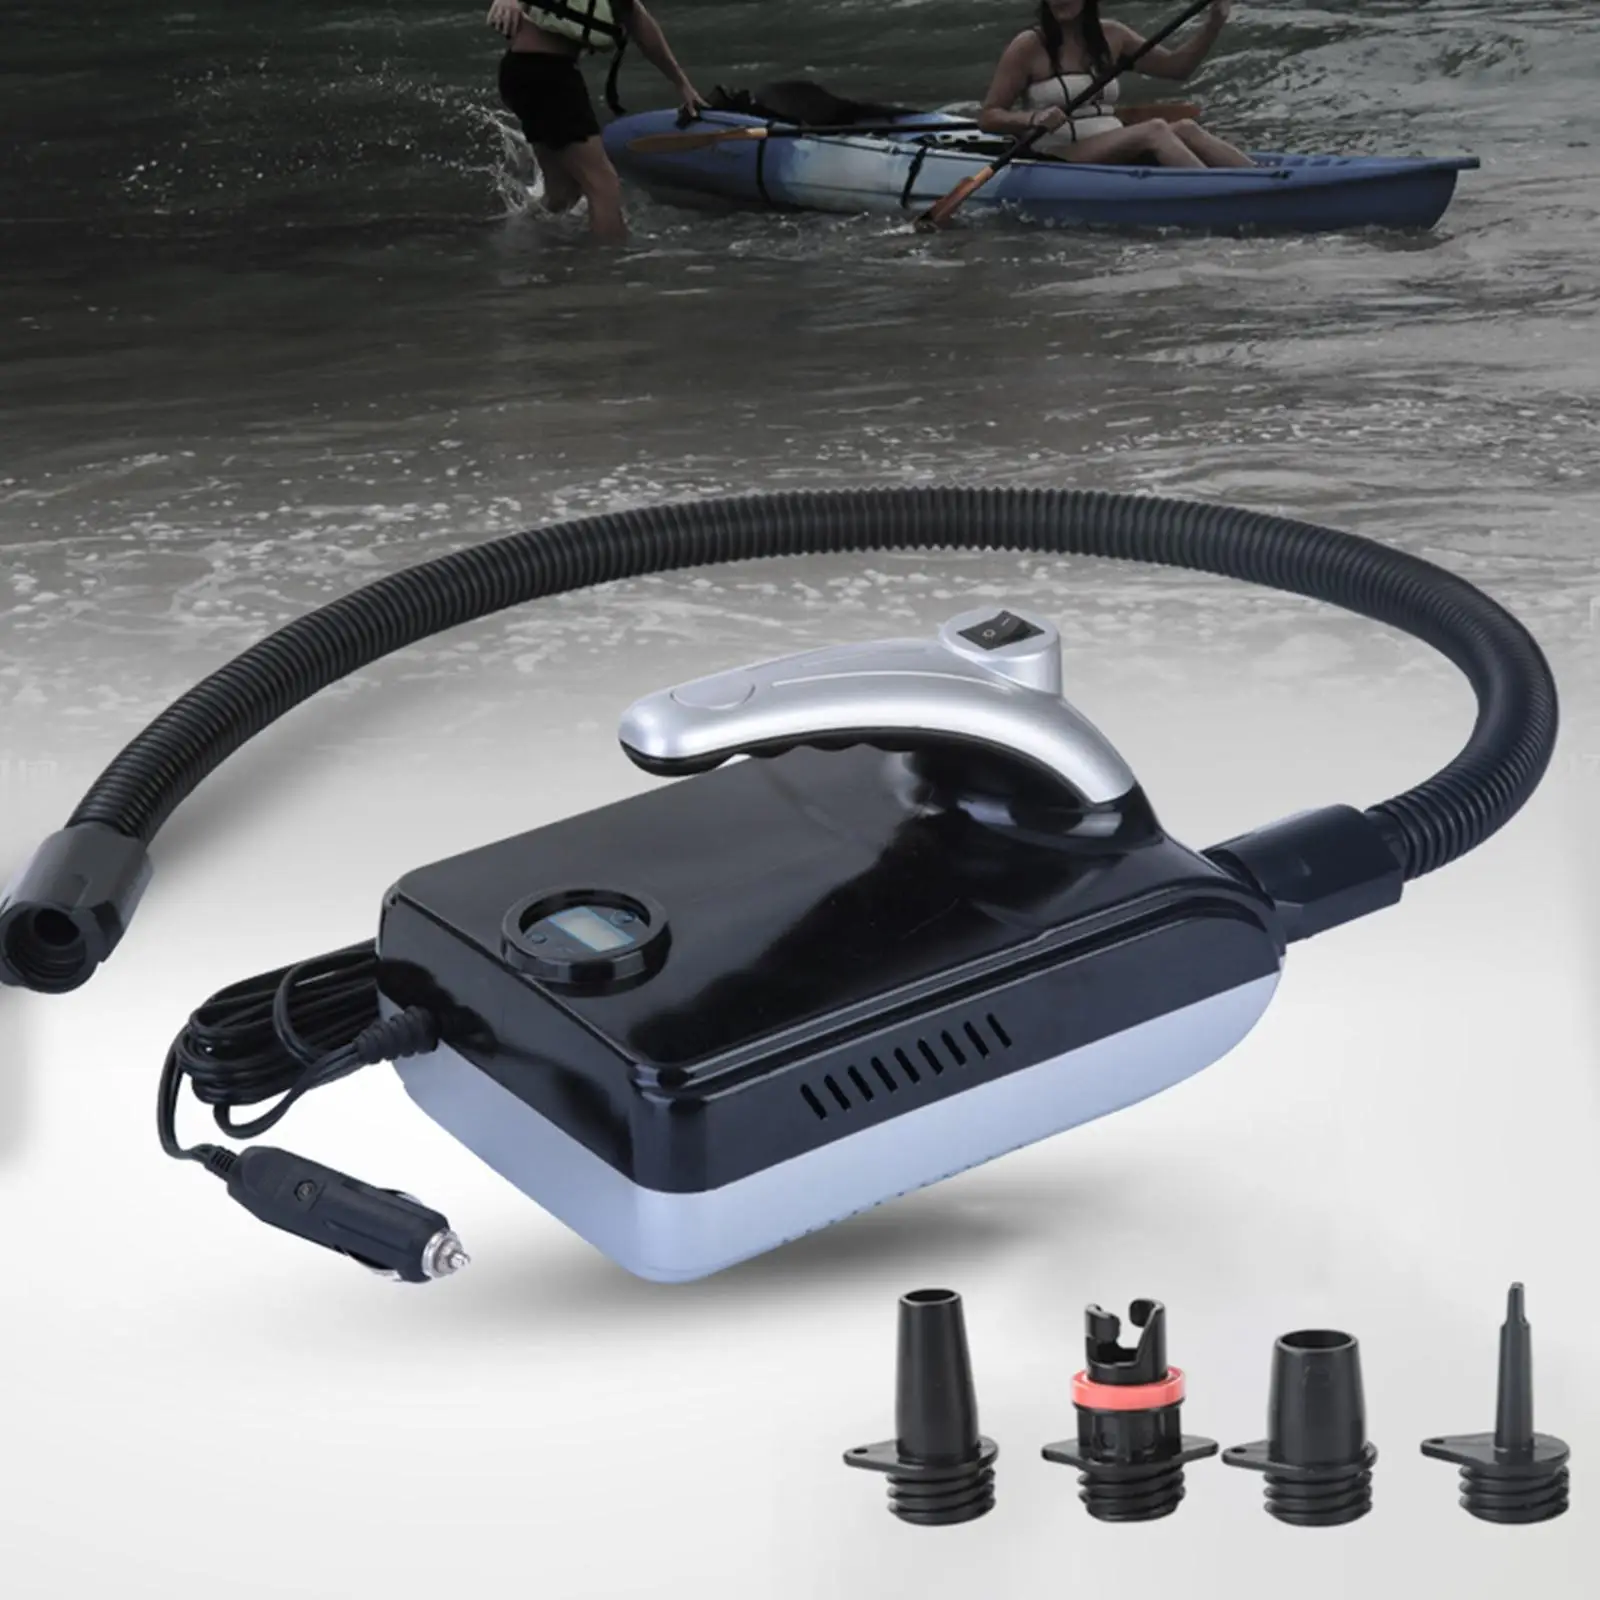 Pump Air Adapter for Inflatable Kayak Canoe Boat Paddle Board